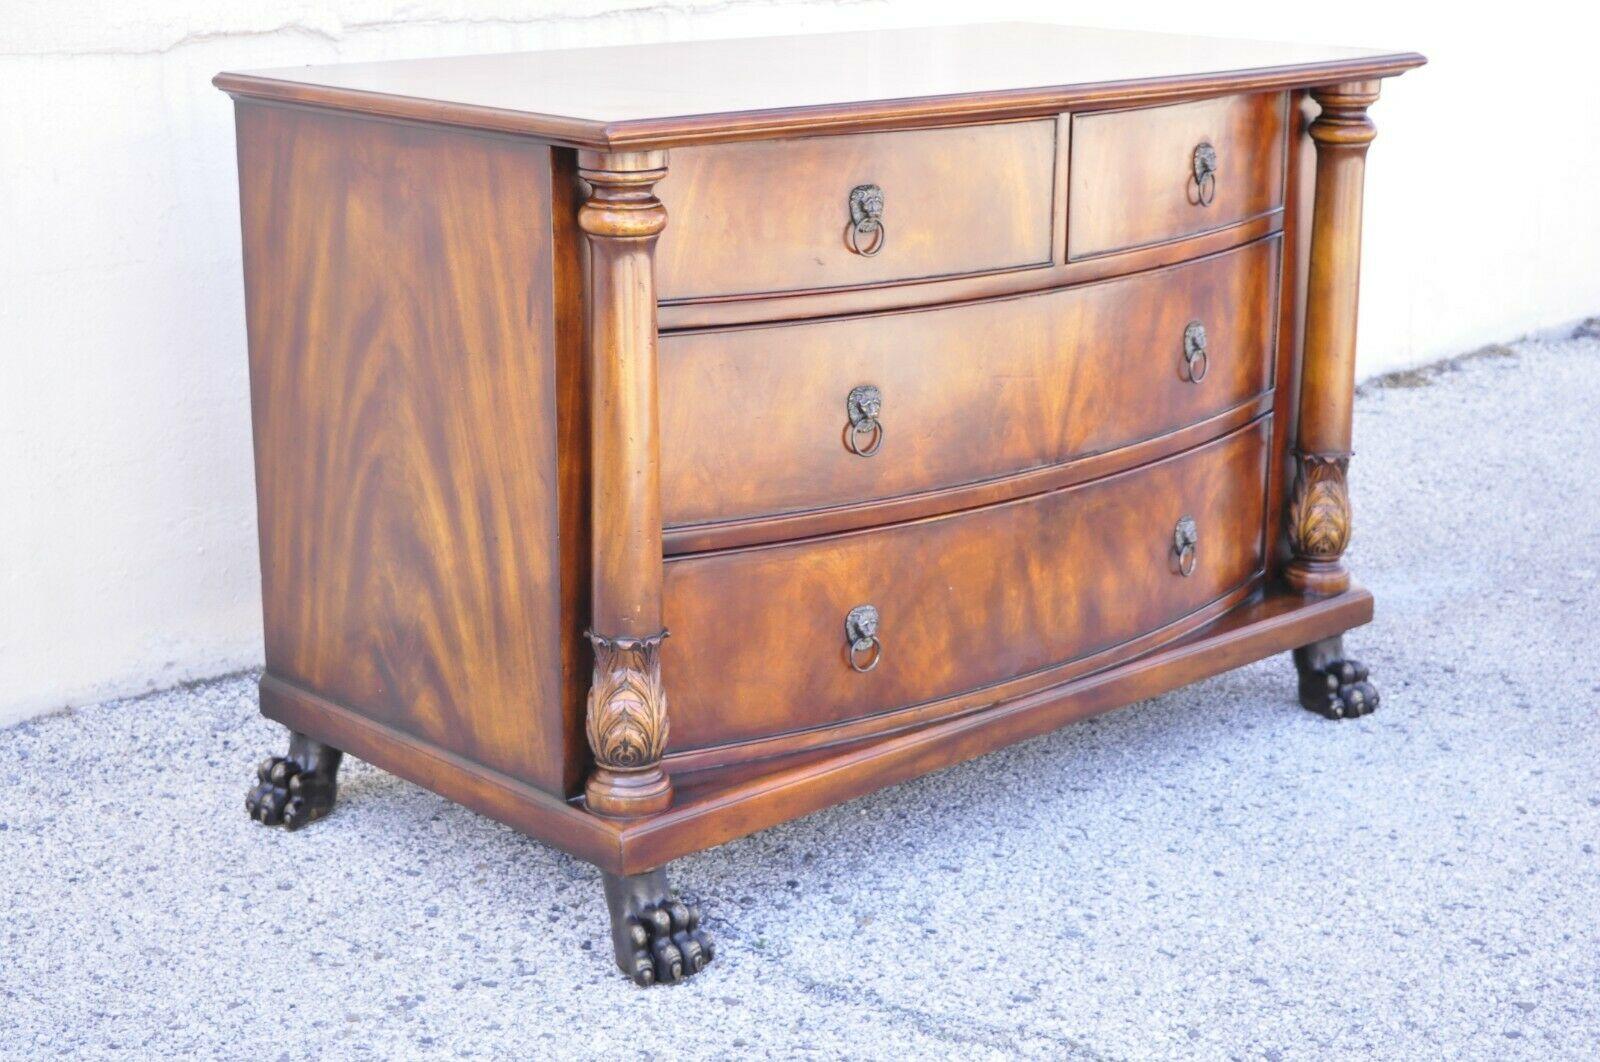 French Empire style mahogany bow front chest dresser with bronze paw feet. Item features cast bronze metal paw feet, bowed front, lion head pulls, solid wood construction, beautiful wood grain, nicely carved details, 4 drawers, very nice item,